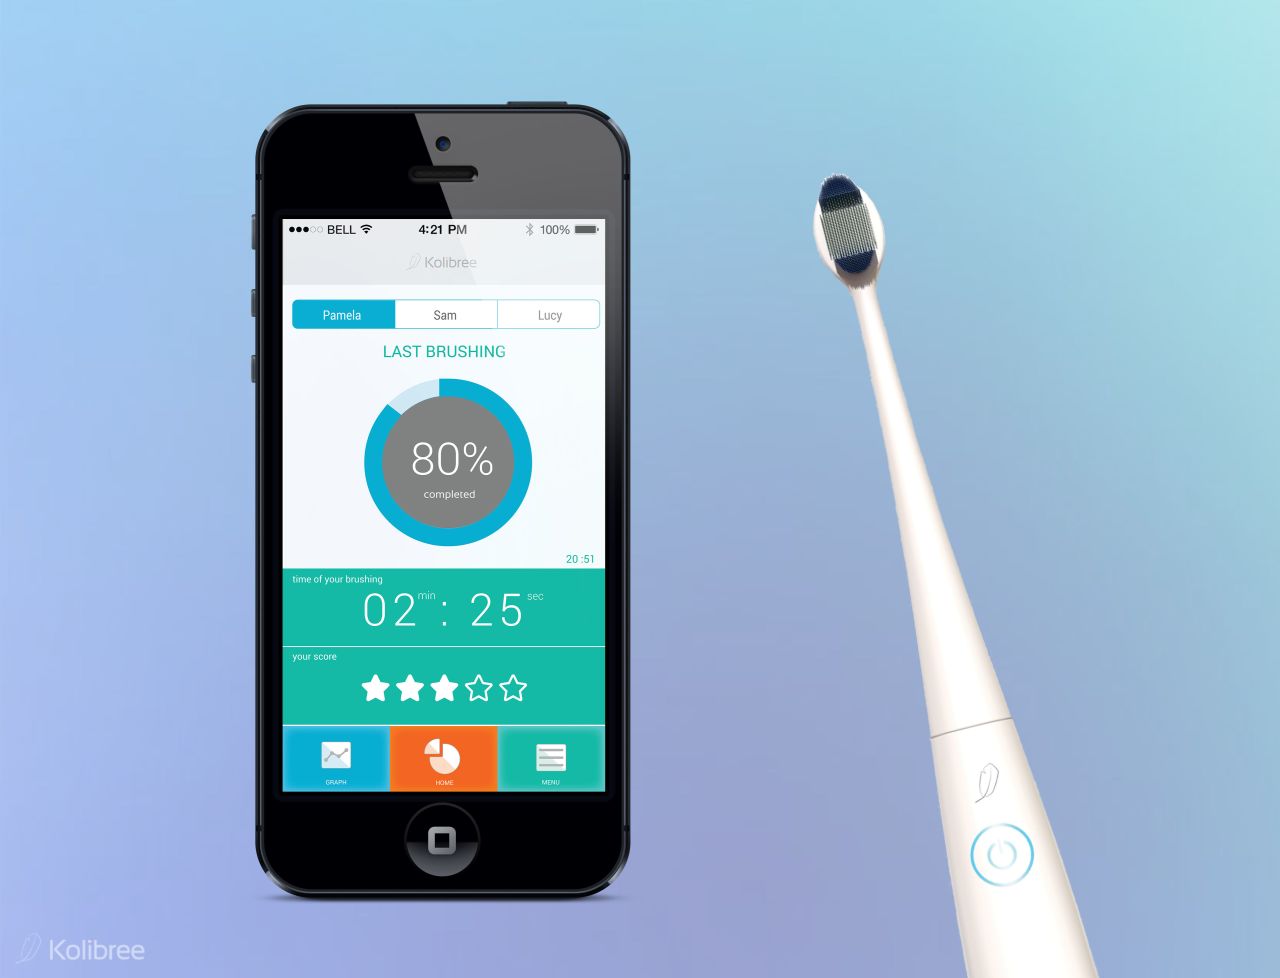 How about a <a href="http://www.cnn.com/2014/01/09/tech/innovation/smart-toothbrush-kolibree/" target="_blank">connected toothbrush</a> that reminds you to brush, or rats out your children when they don't? From Kolibree, this brush also sends notifications to your phone.